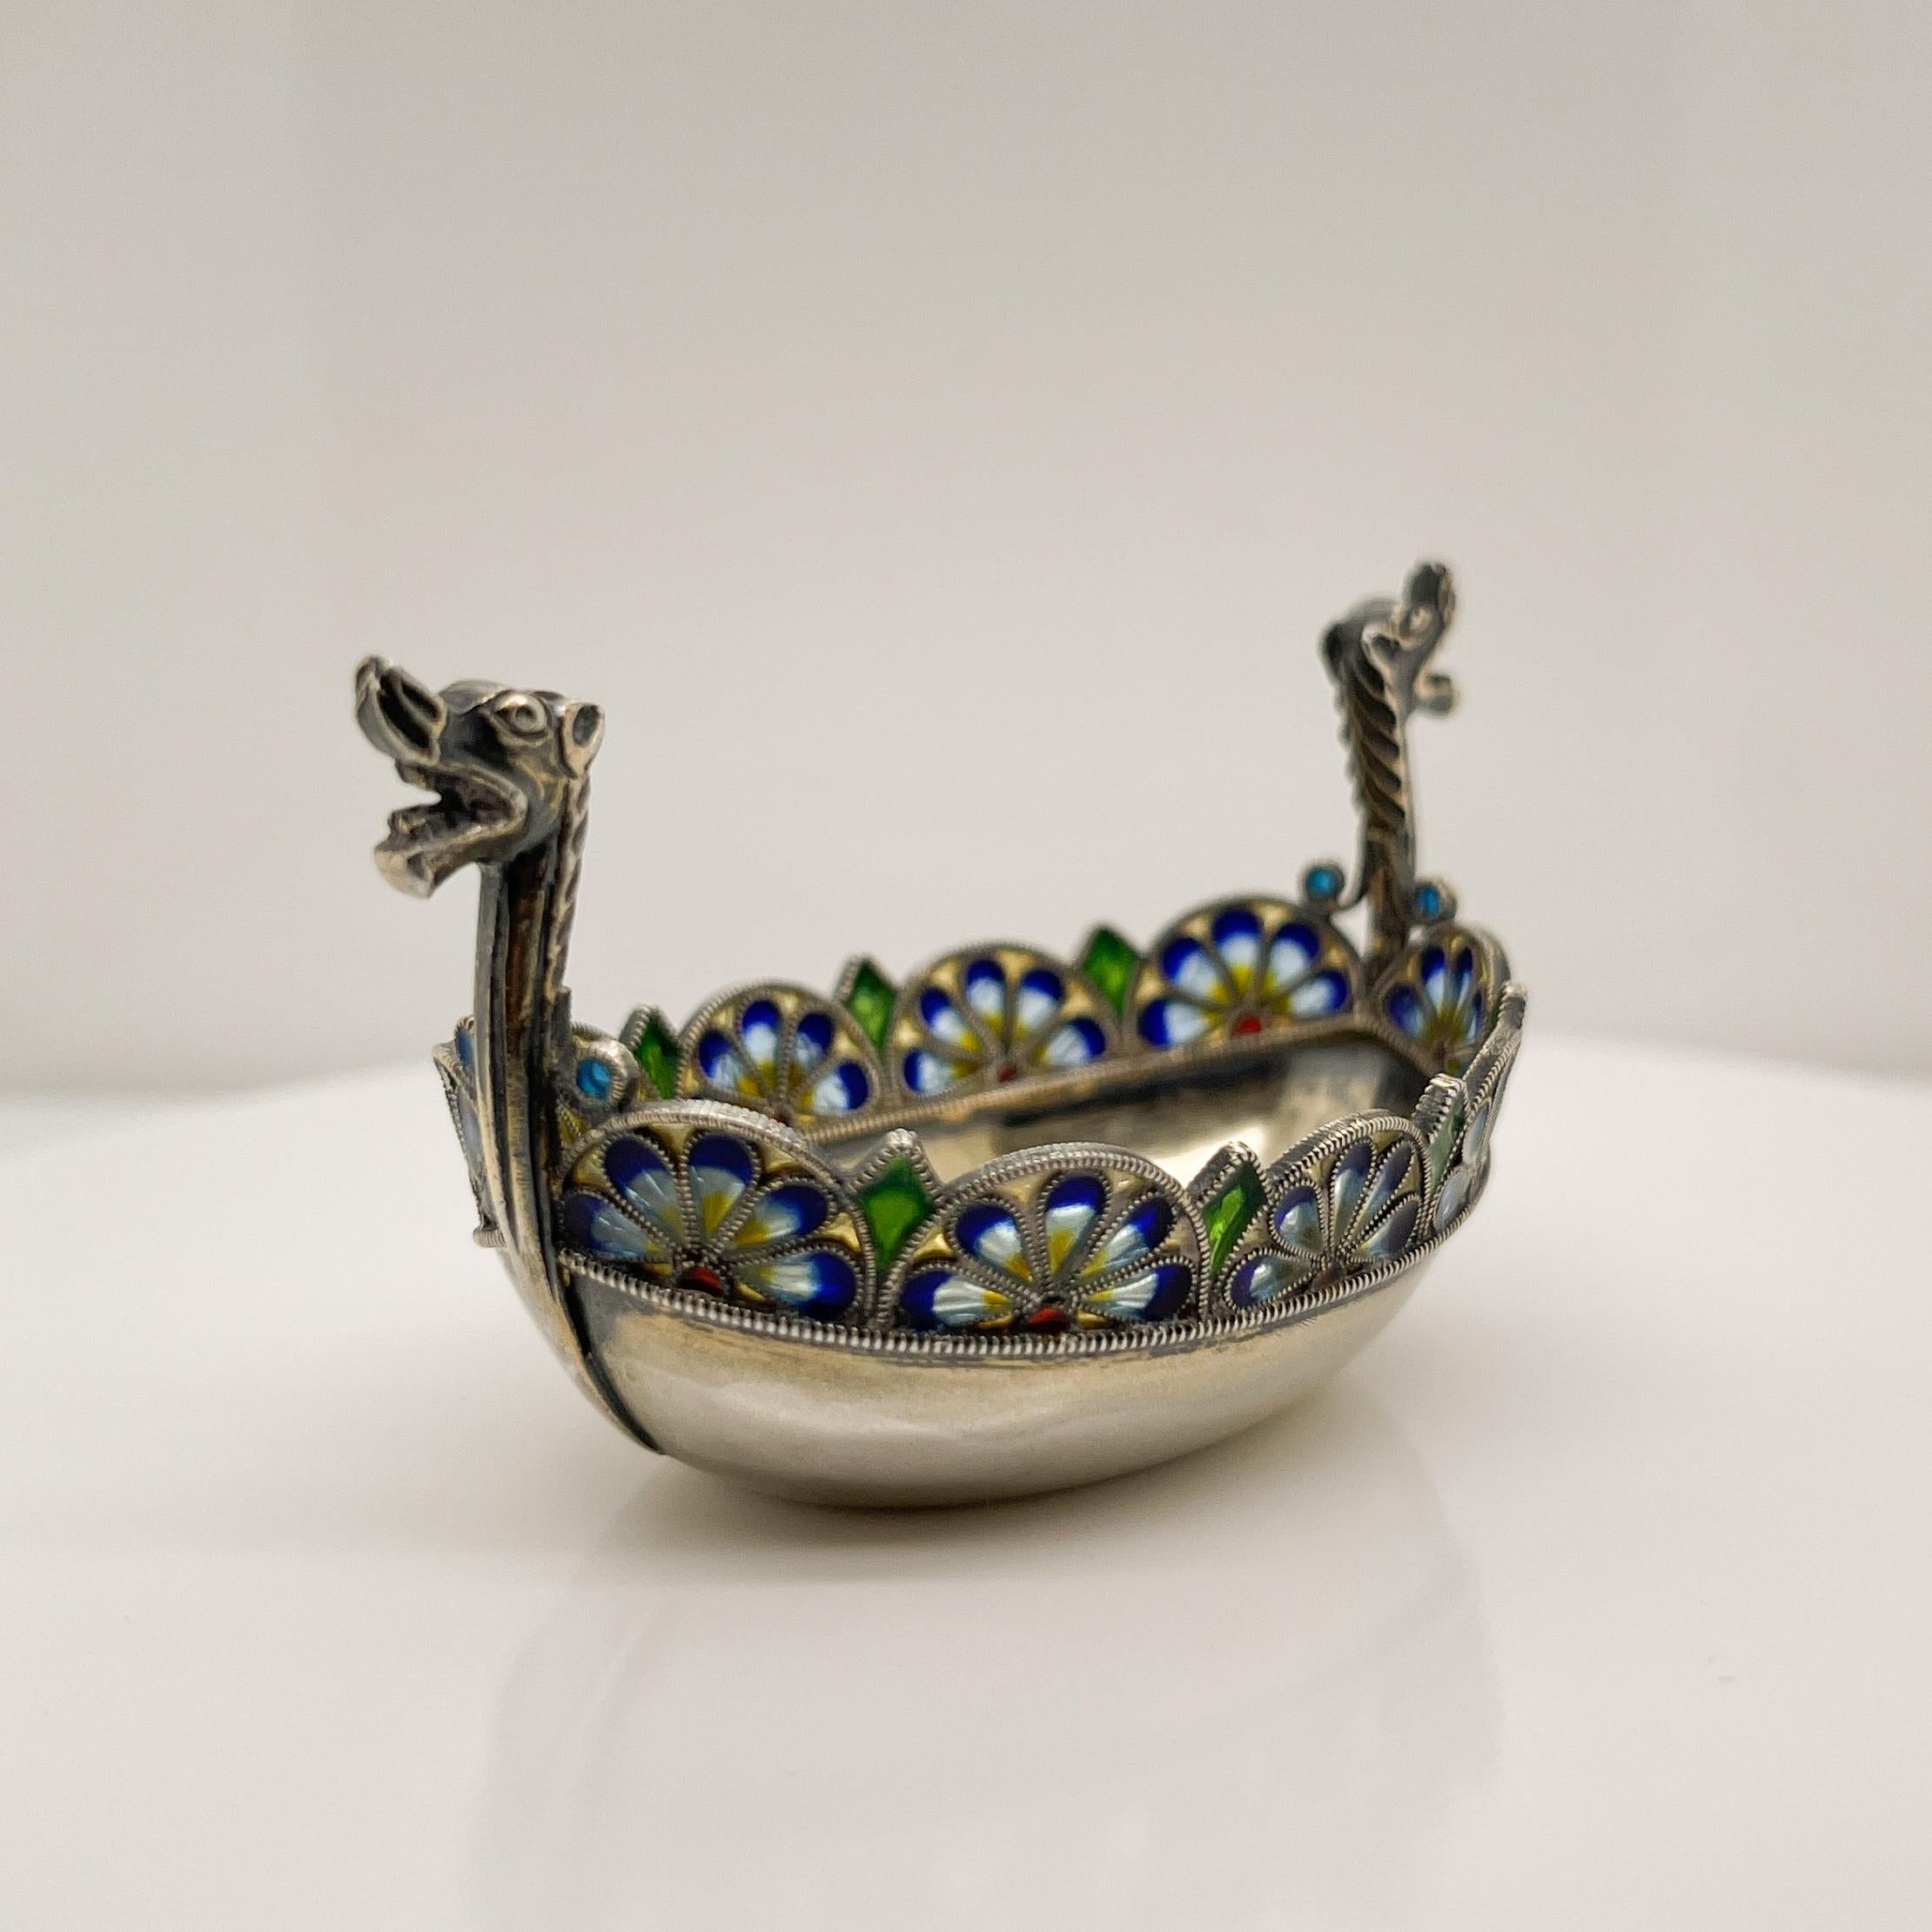 A very fine sterling silver and plique a jour enamel salt cellar.

Modeled as a Viking boat.

With remnants of its original gilding.

Simply a terrific piece!

Date:
Late 19th or Early 20th Century

Overall Condition:
It is in overall good,